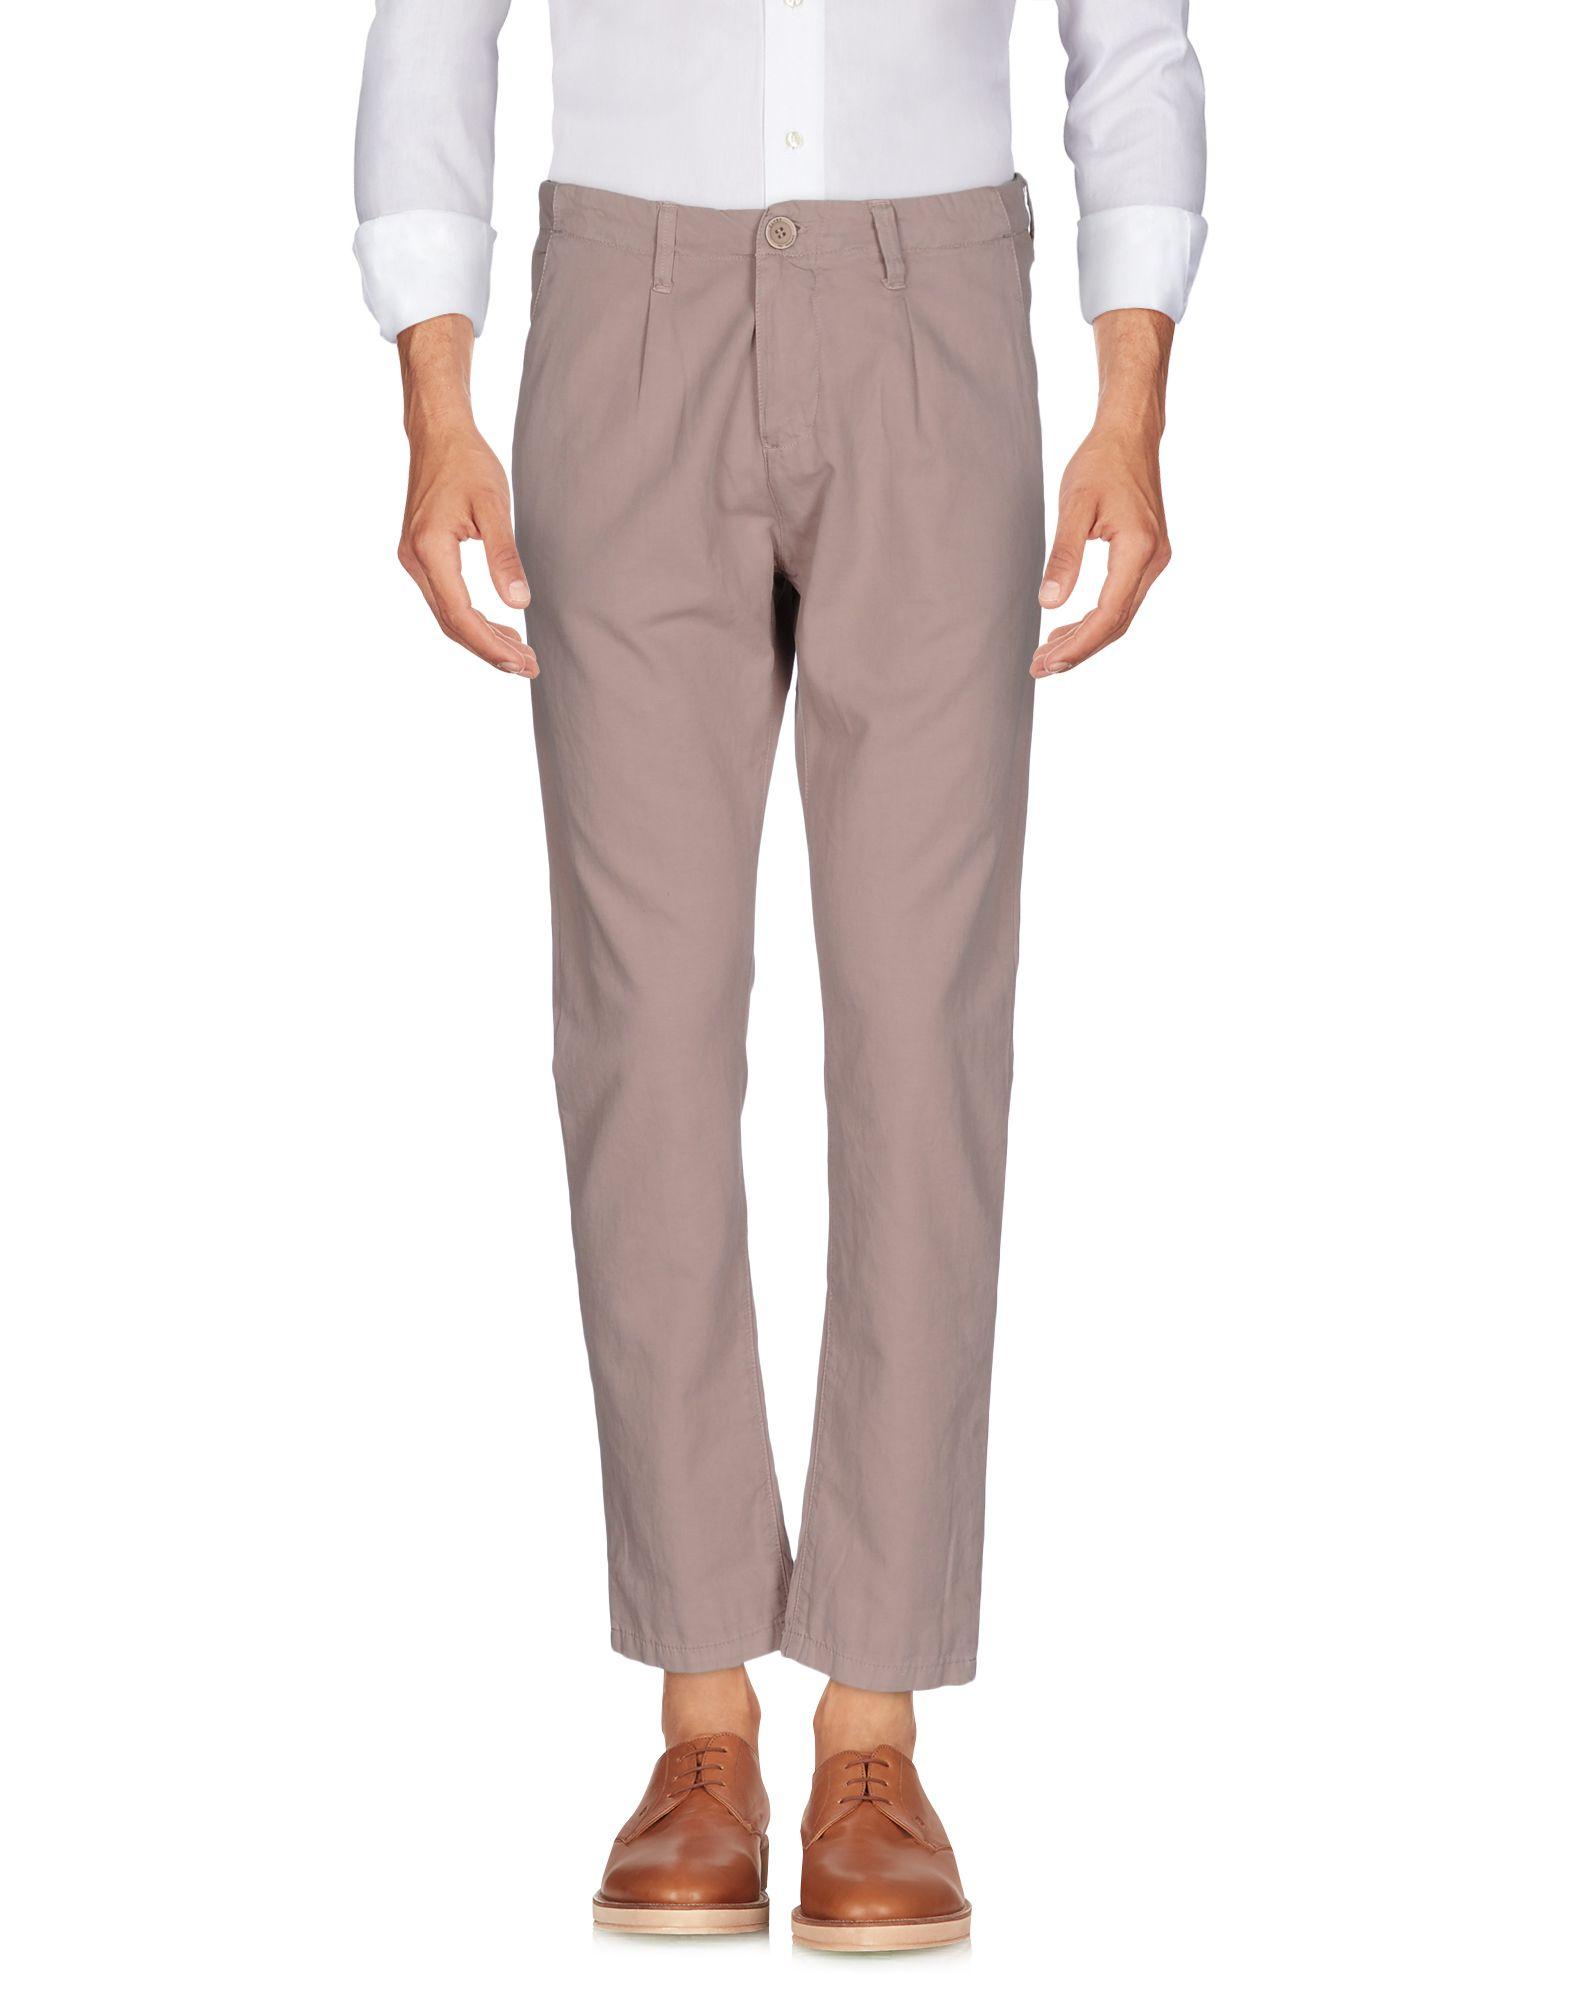 Lyst - Fiver Casual Pants in Brown for Men